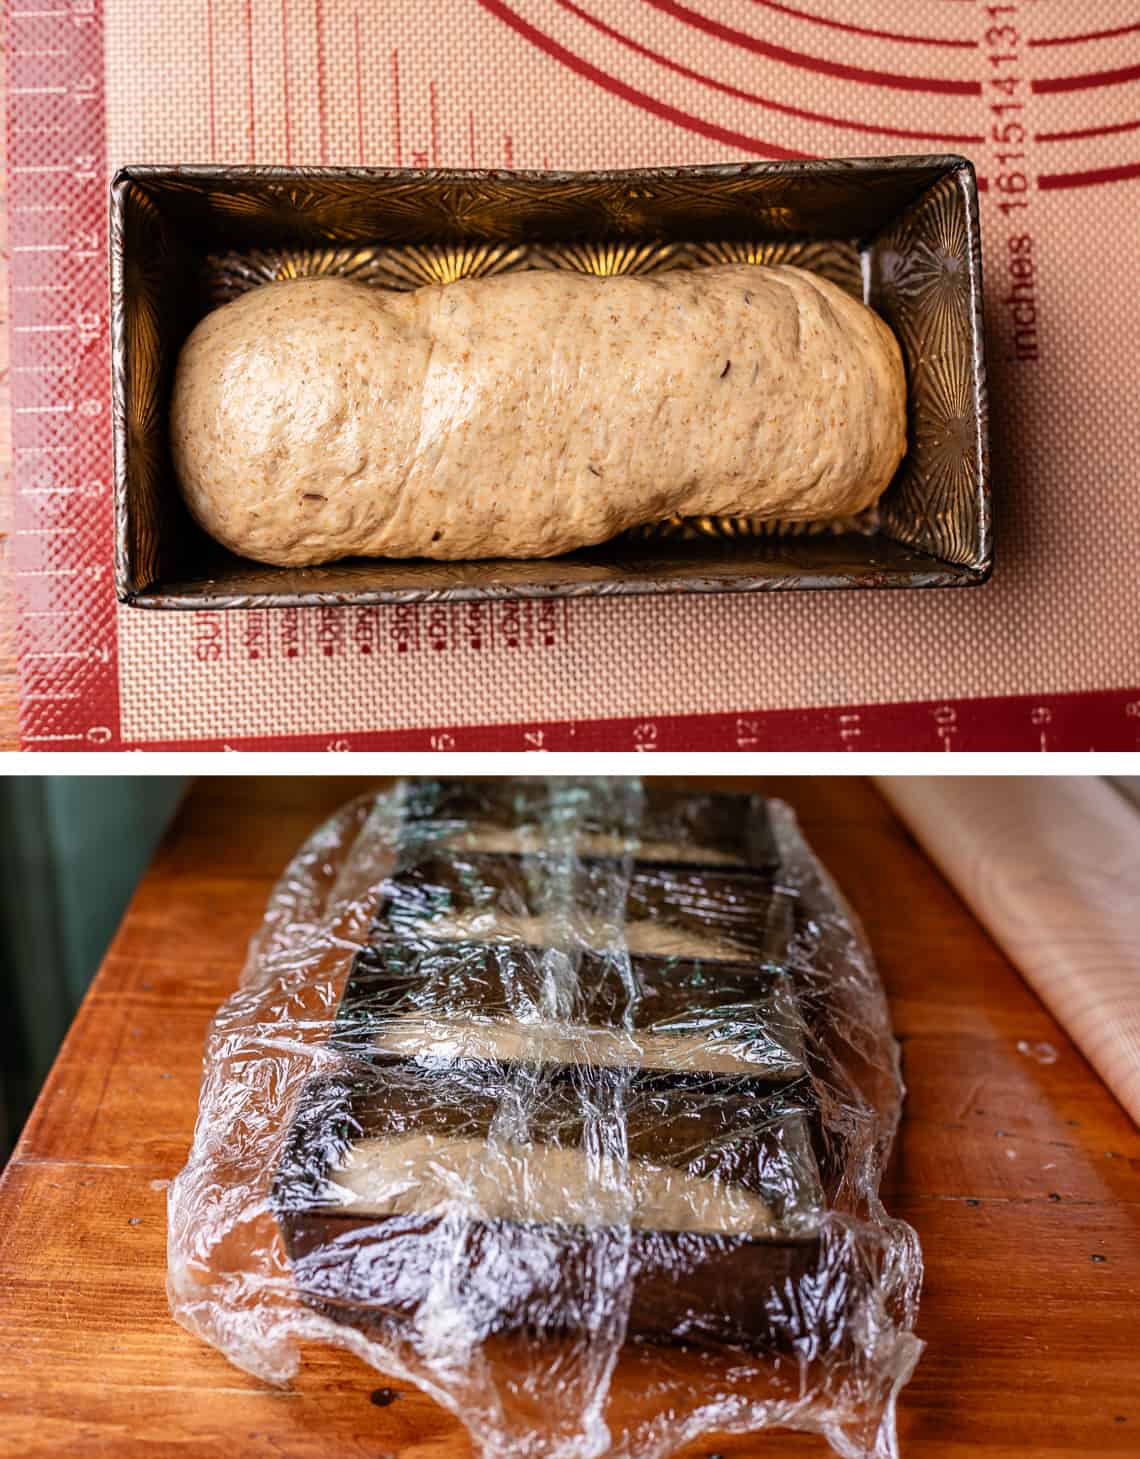 top unrisen bread in pan, bottom four pans with loaves in them covered in plastic wrap.